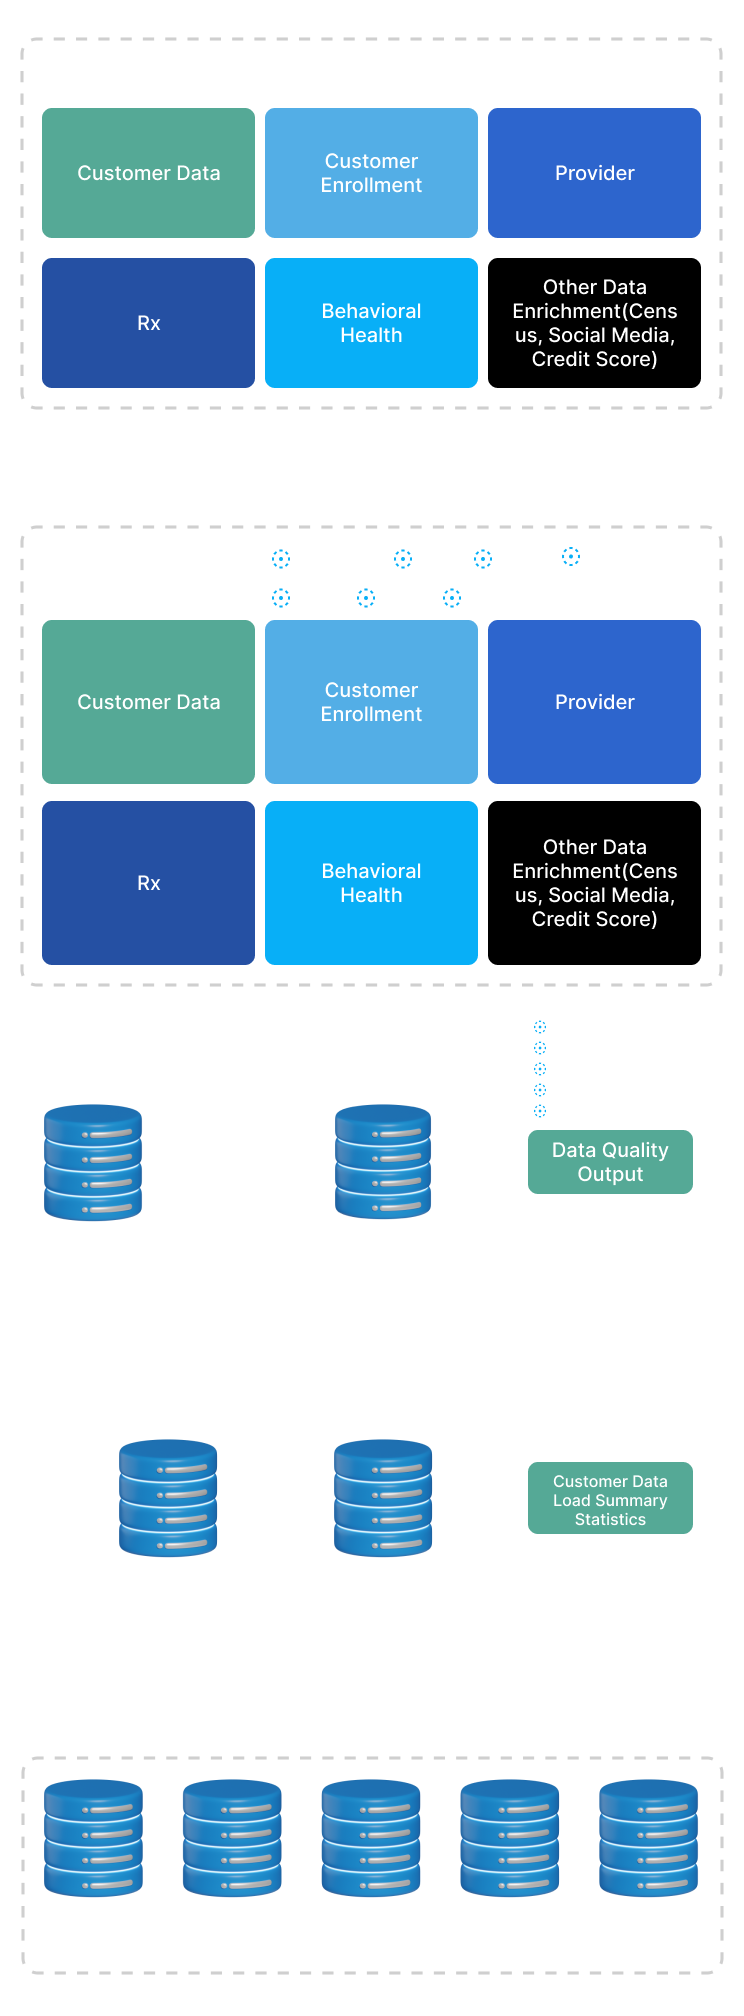 A Top Level View of Data Process Touch Points